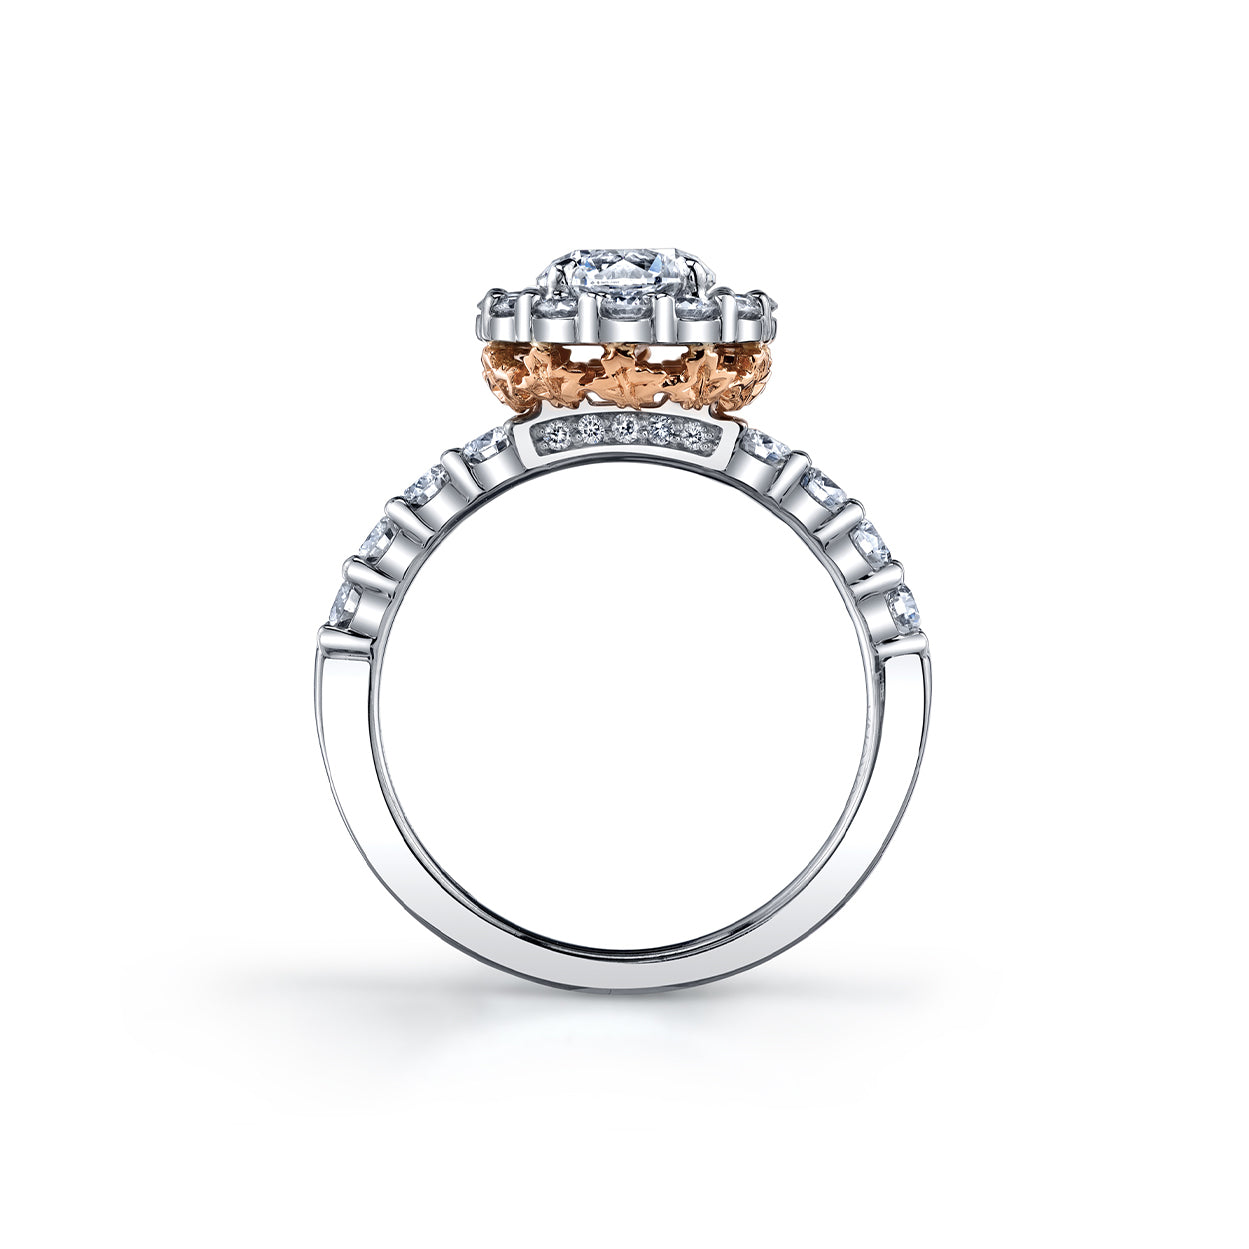 Crafted in 18KT rose and white Certified Canadian Gold, this ring features a diamond set band and halo with a round brilliant-cut Canadian centre diamond and hidden maple leaf details.